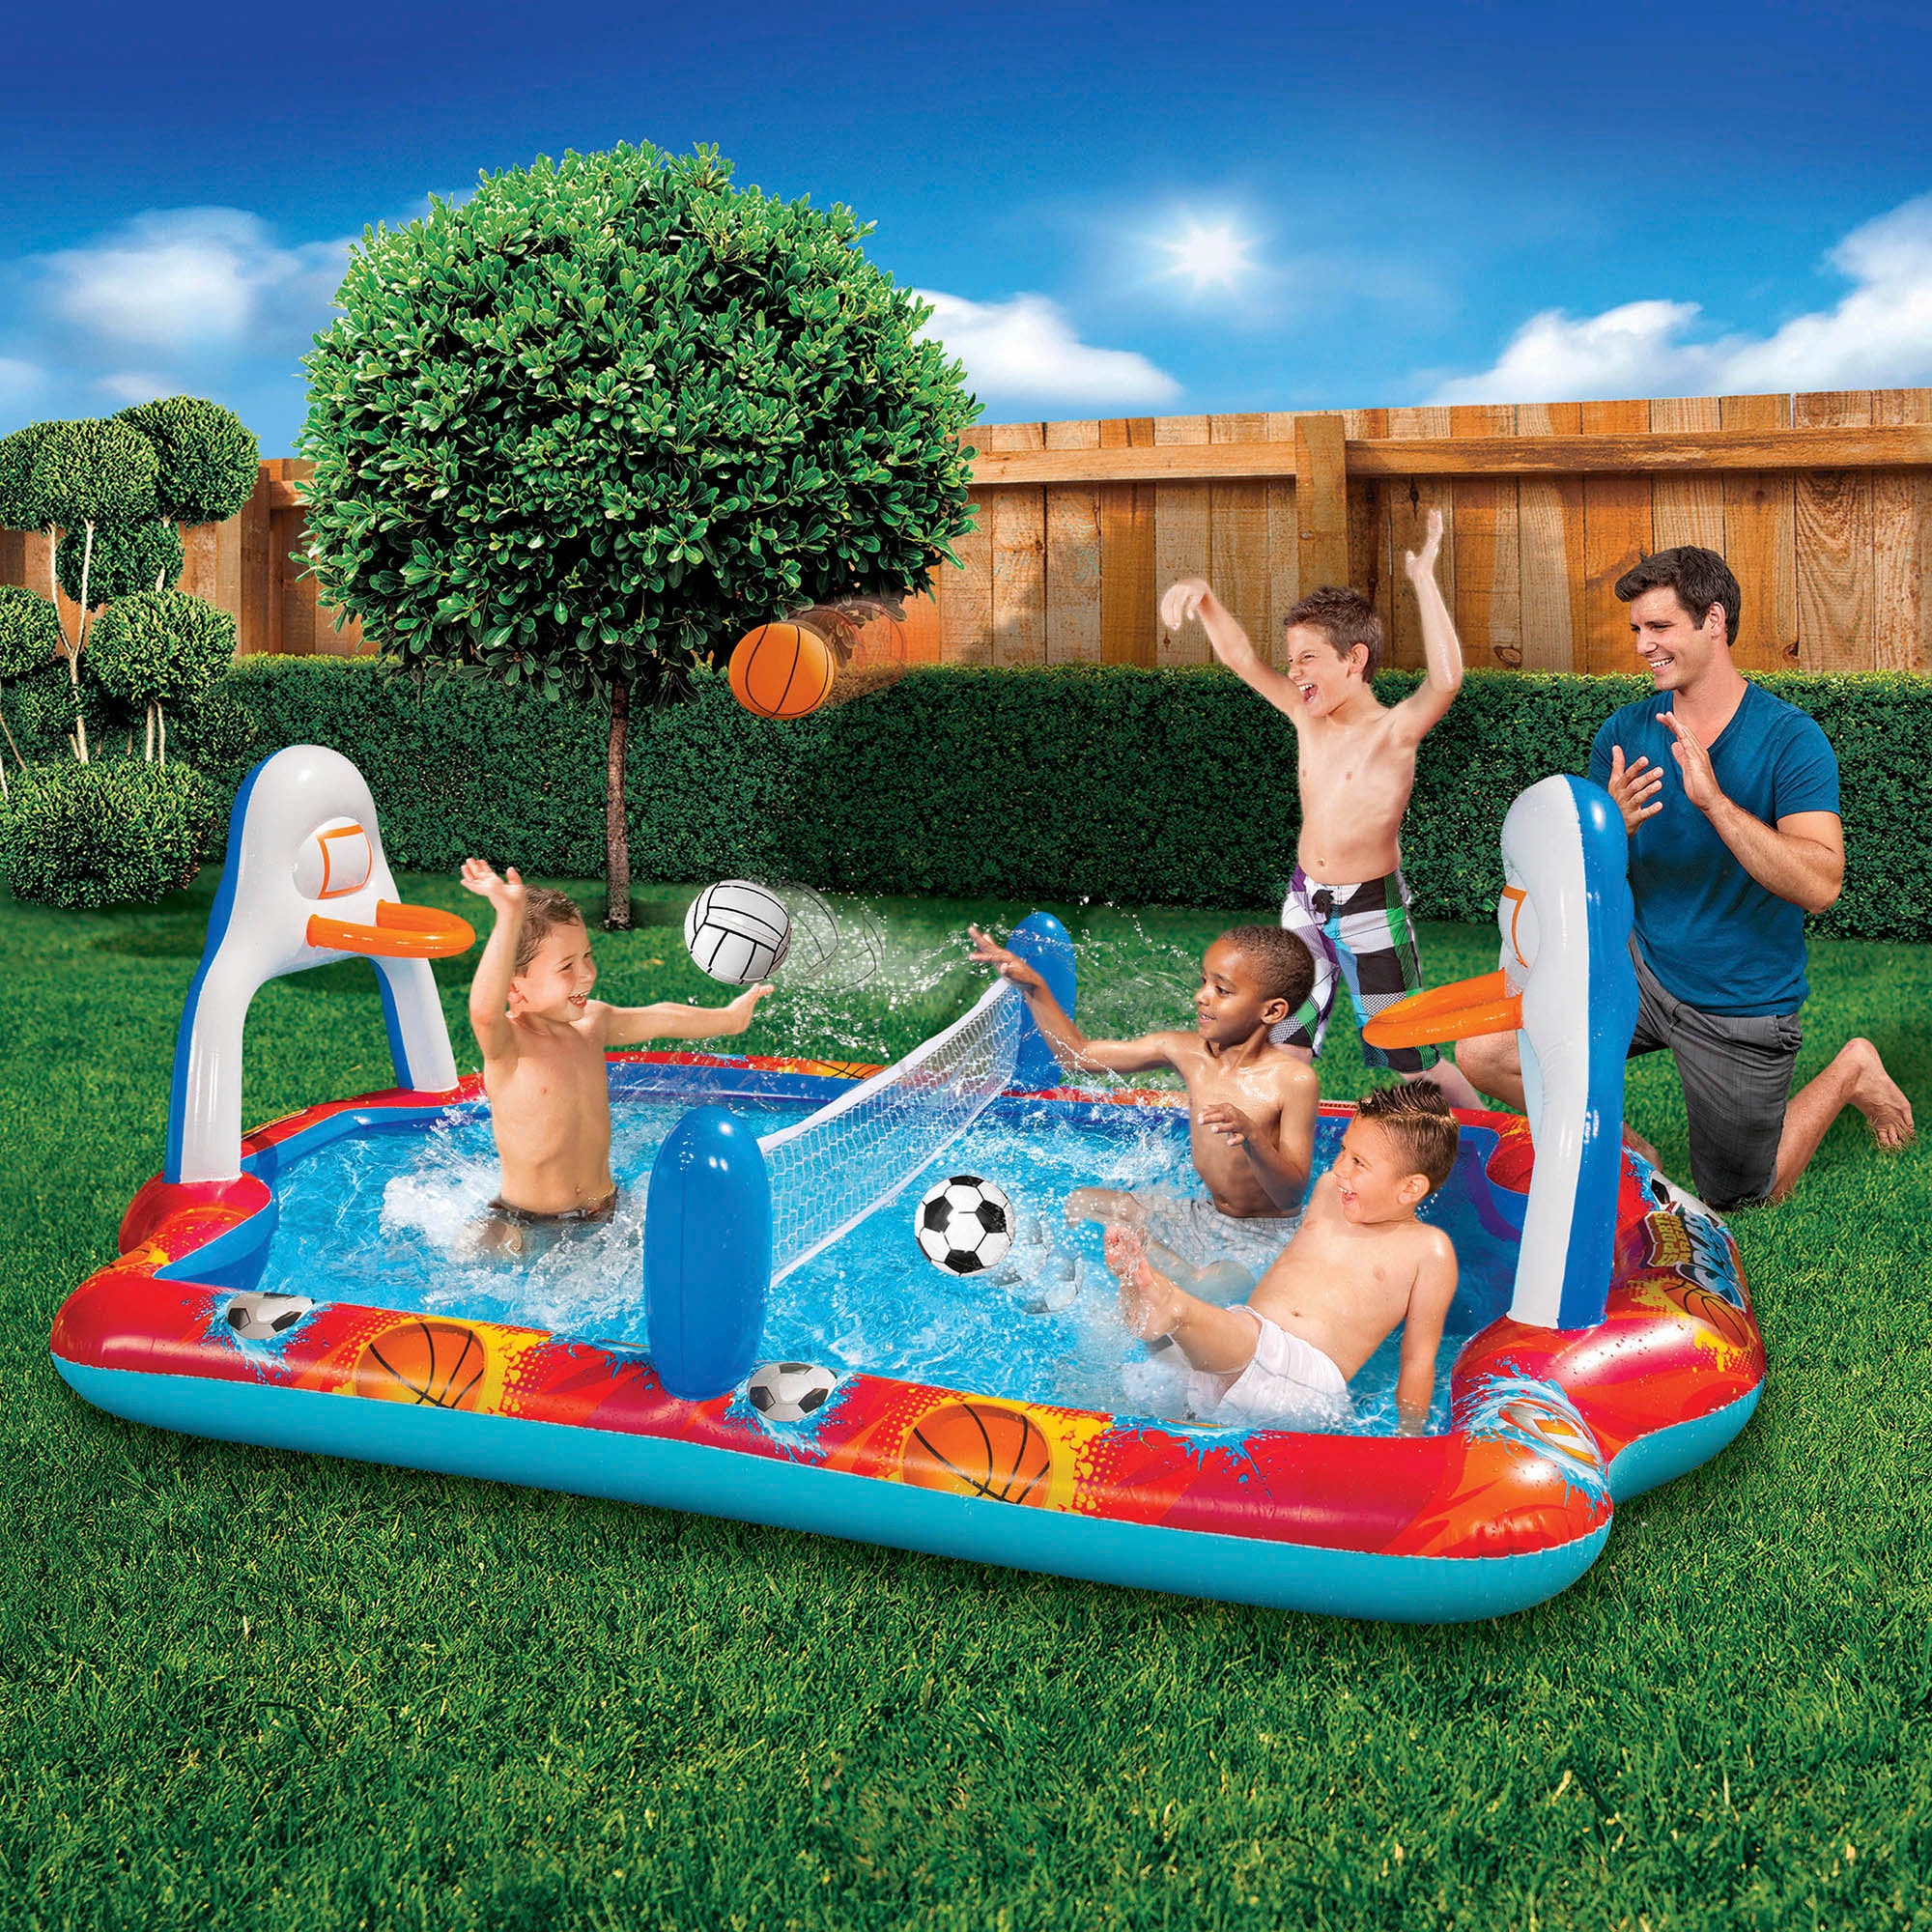 0191124435370 - BANZAI - SPORTS ARENA 4-IN-1 PLAY CENTER POOL